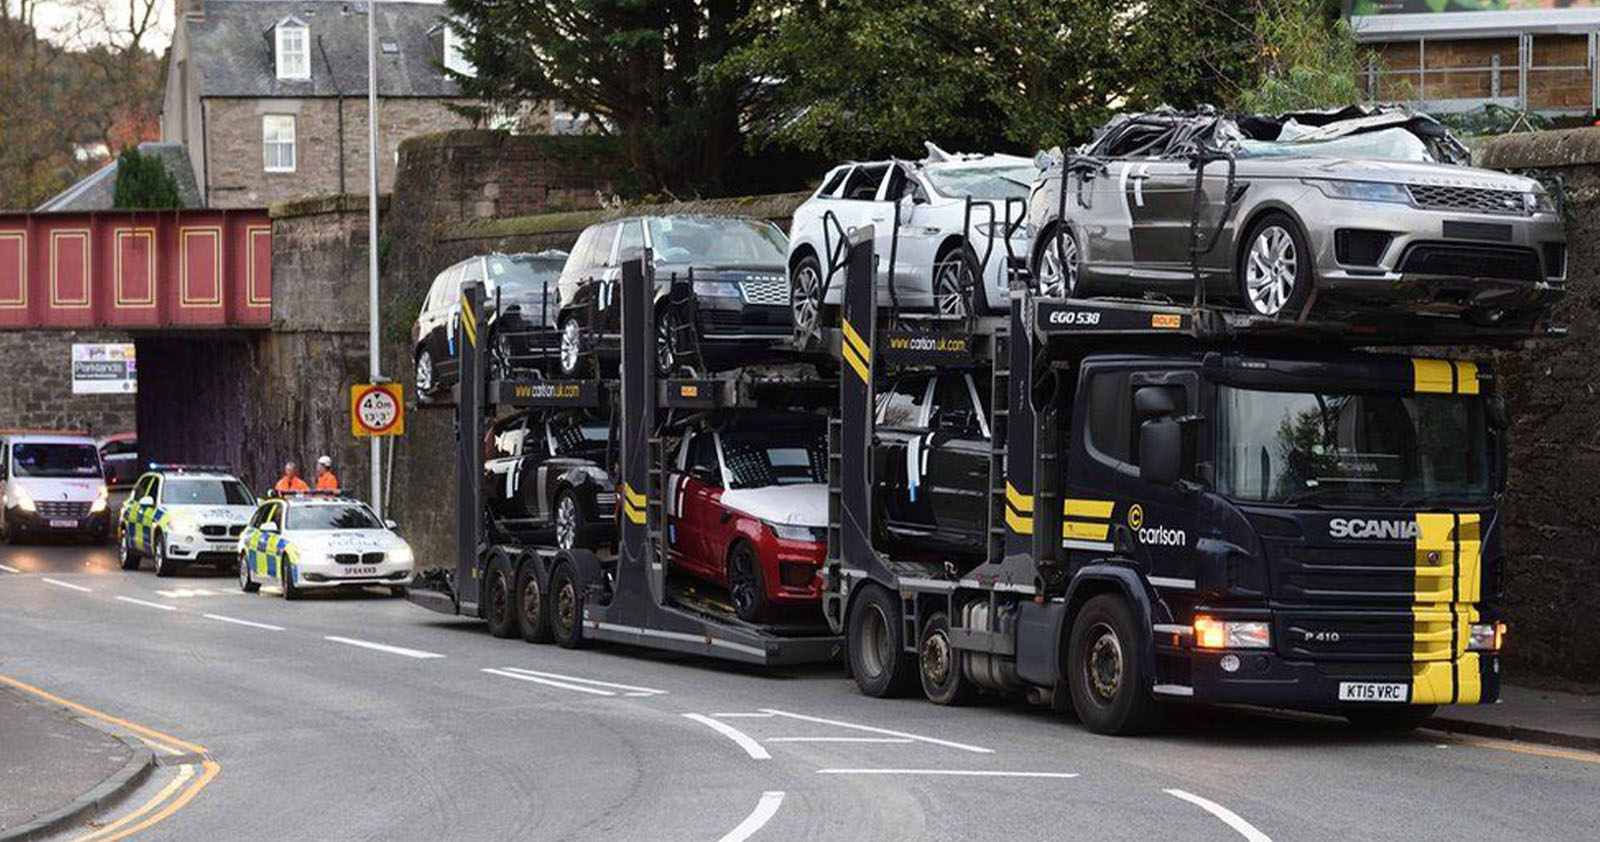 Crushed Range Rovers in the UK during transport.